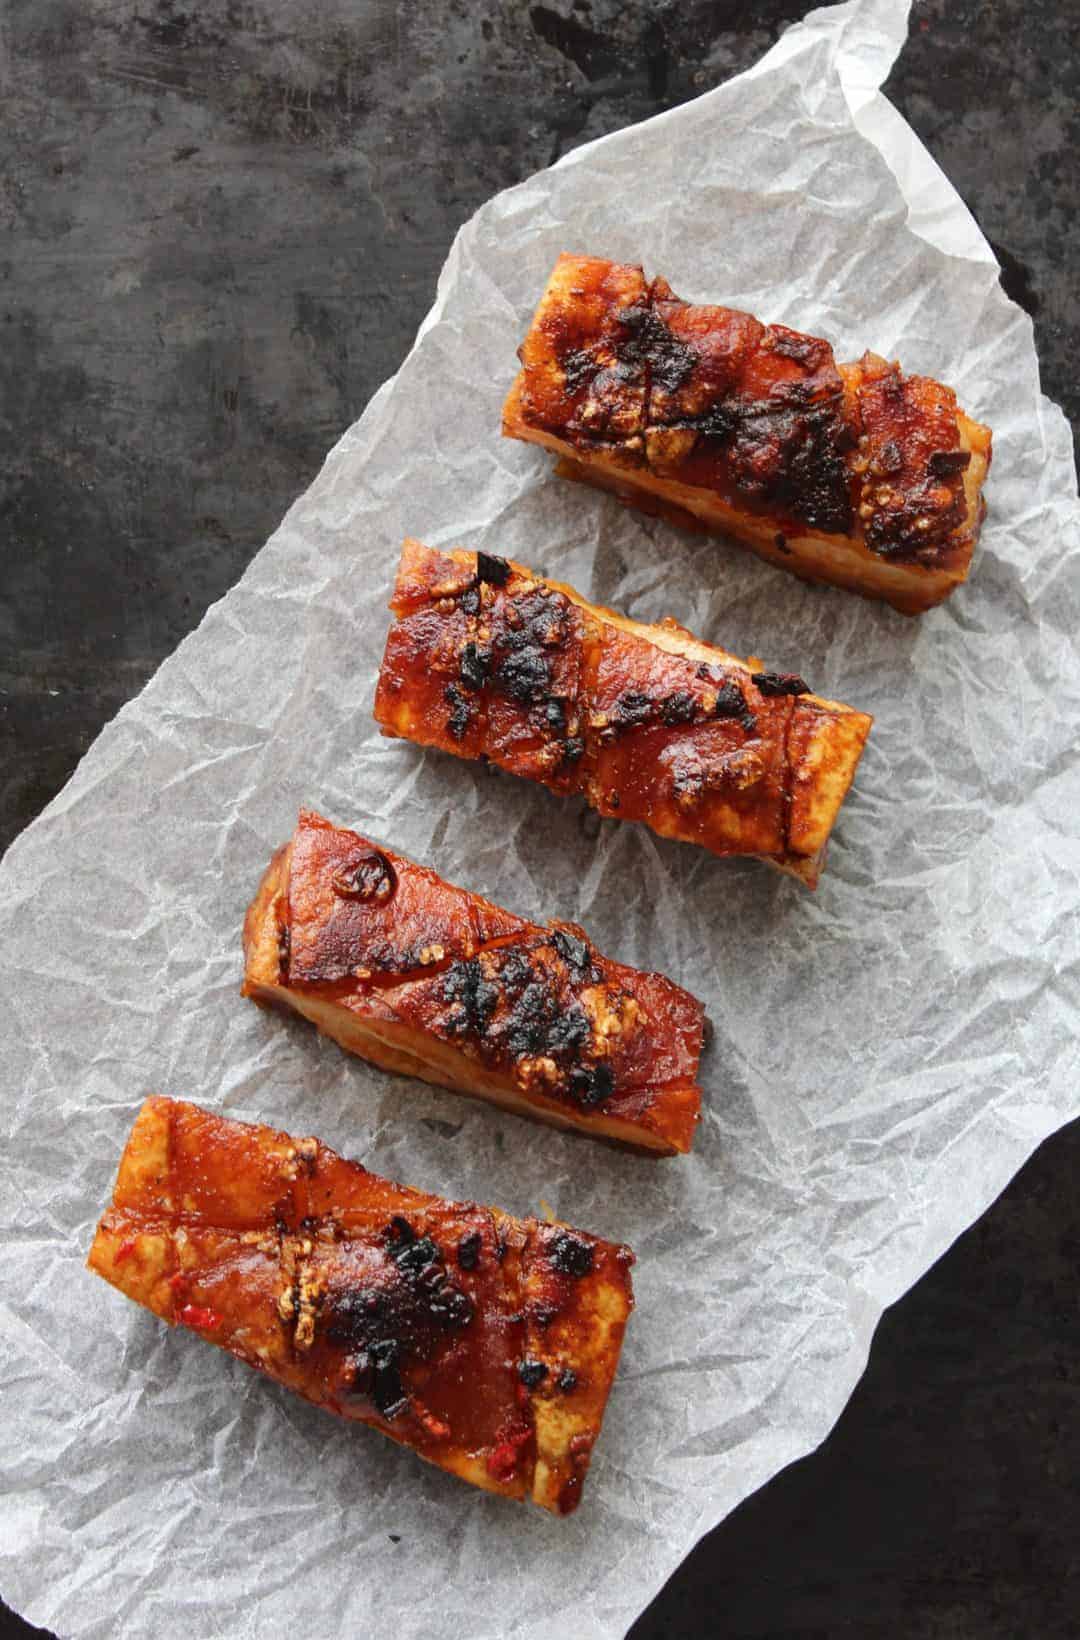 Chilli and Cider Pork Belly slices on parchment